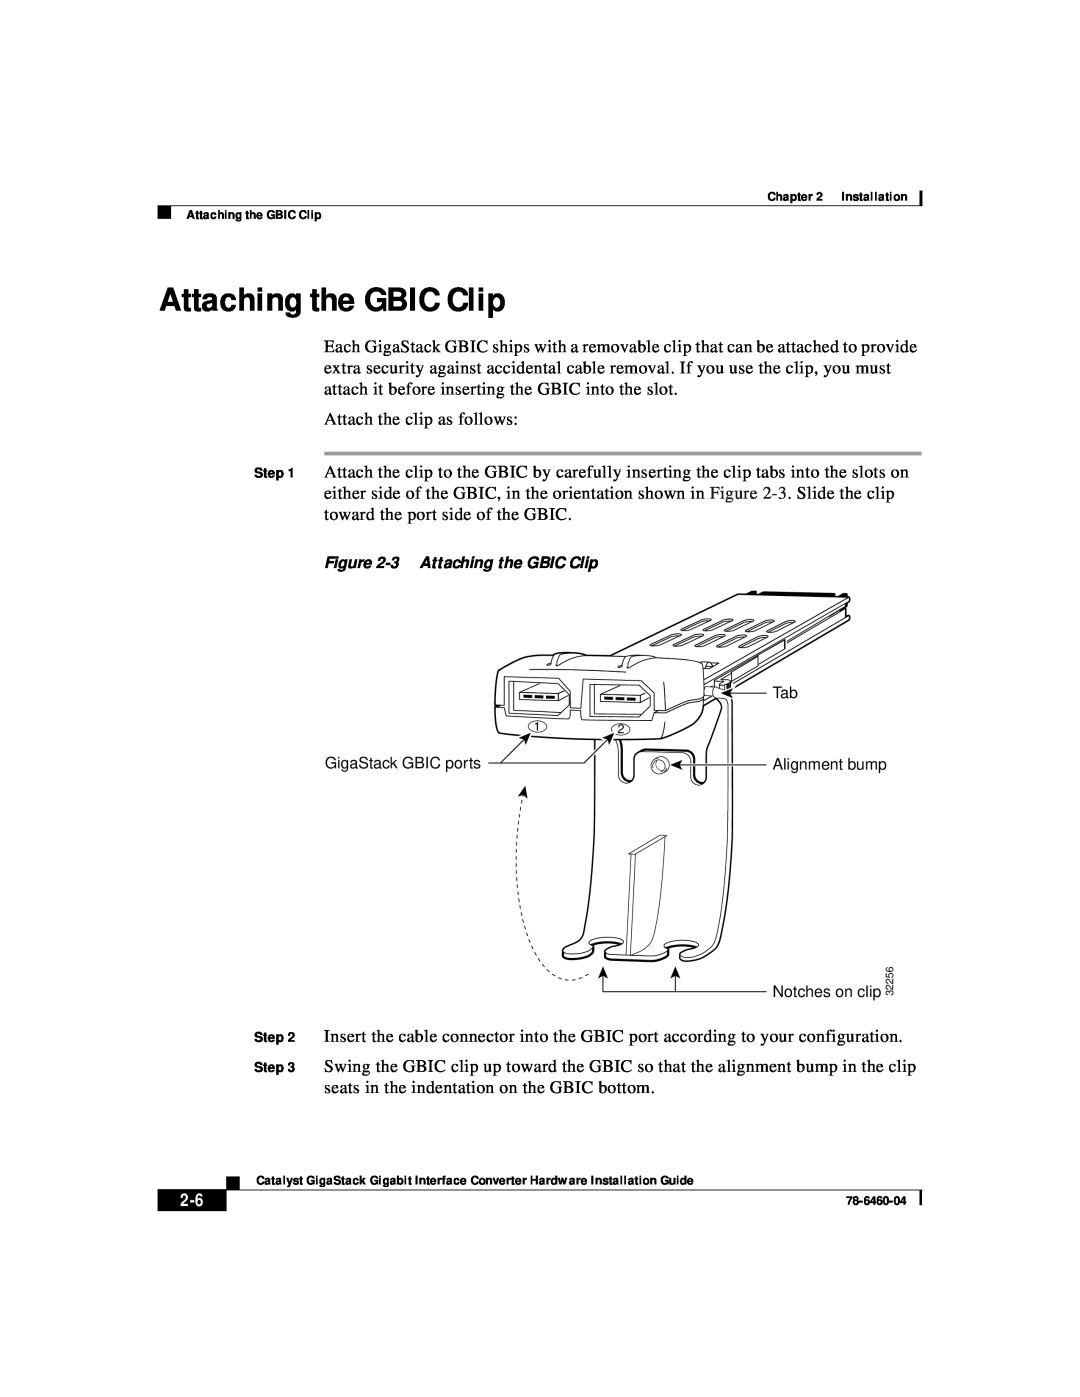 Cisco Systems WS-X3500-XL manual Attaching the GBIC Clip 